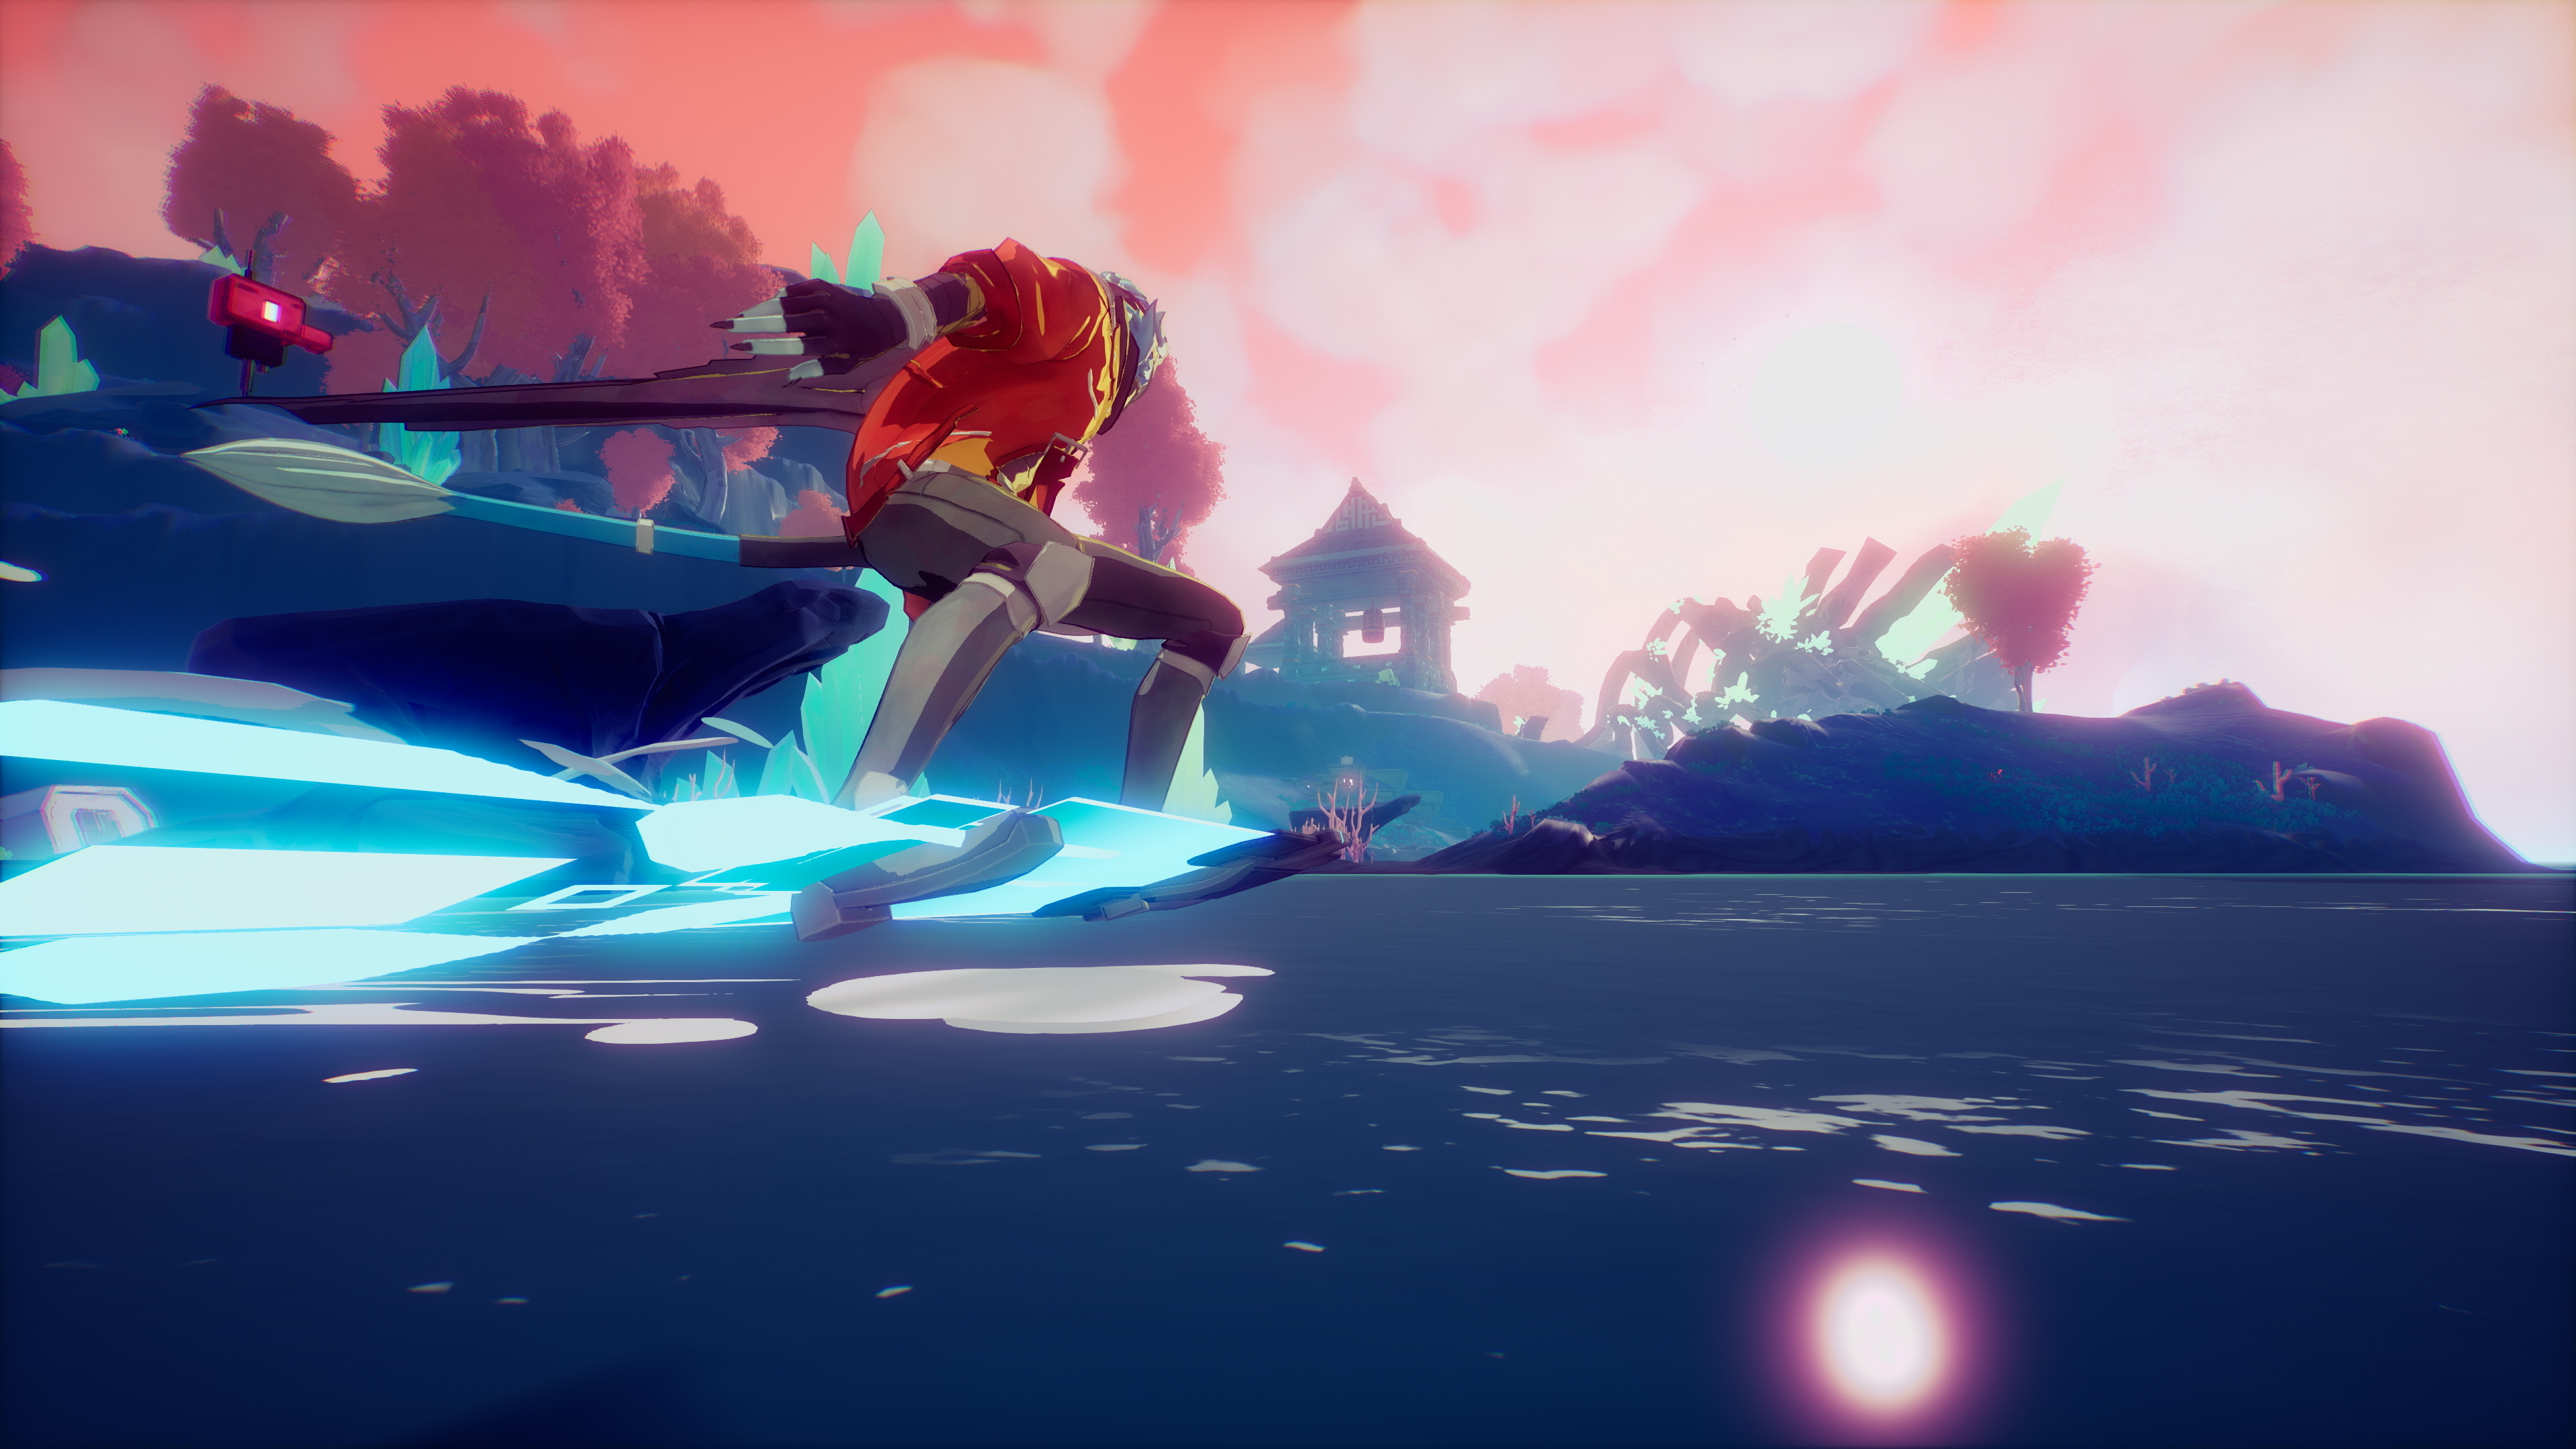 'The Light Destroyer' Trailer Release, Coming to Steam Early Access at the End of Summer